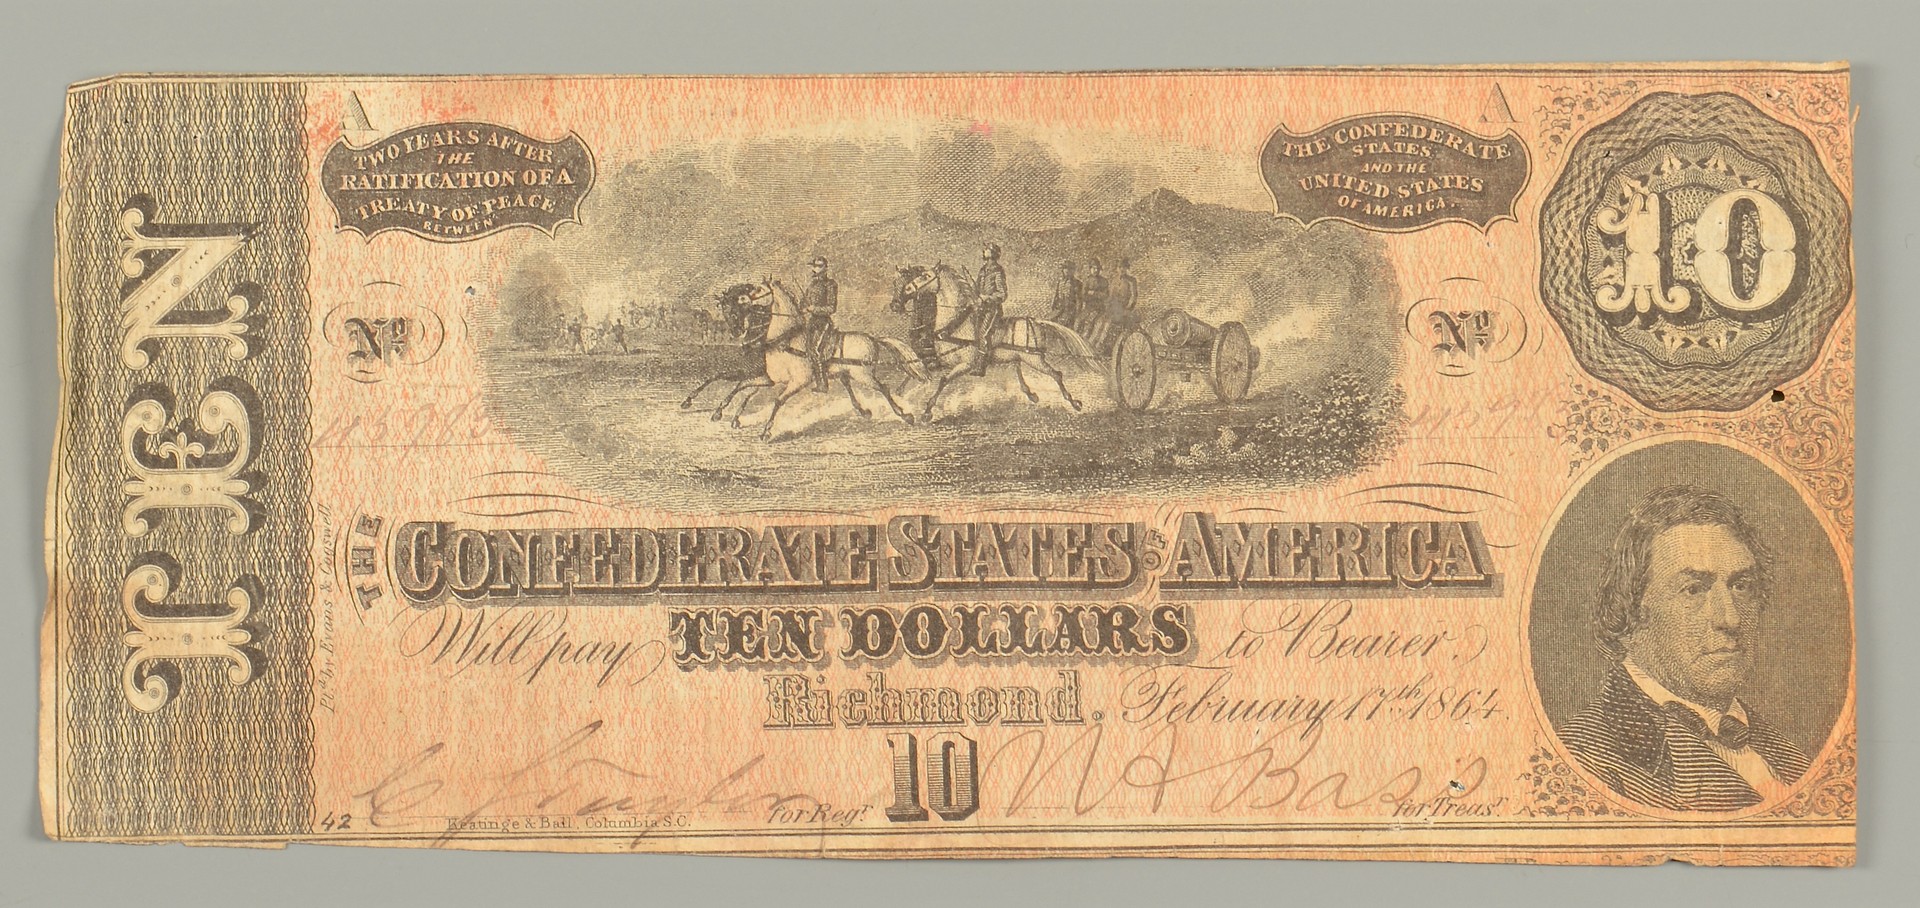 Lot 500: Archive of Confederate Currency & Premium Cup